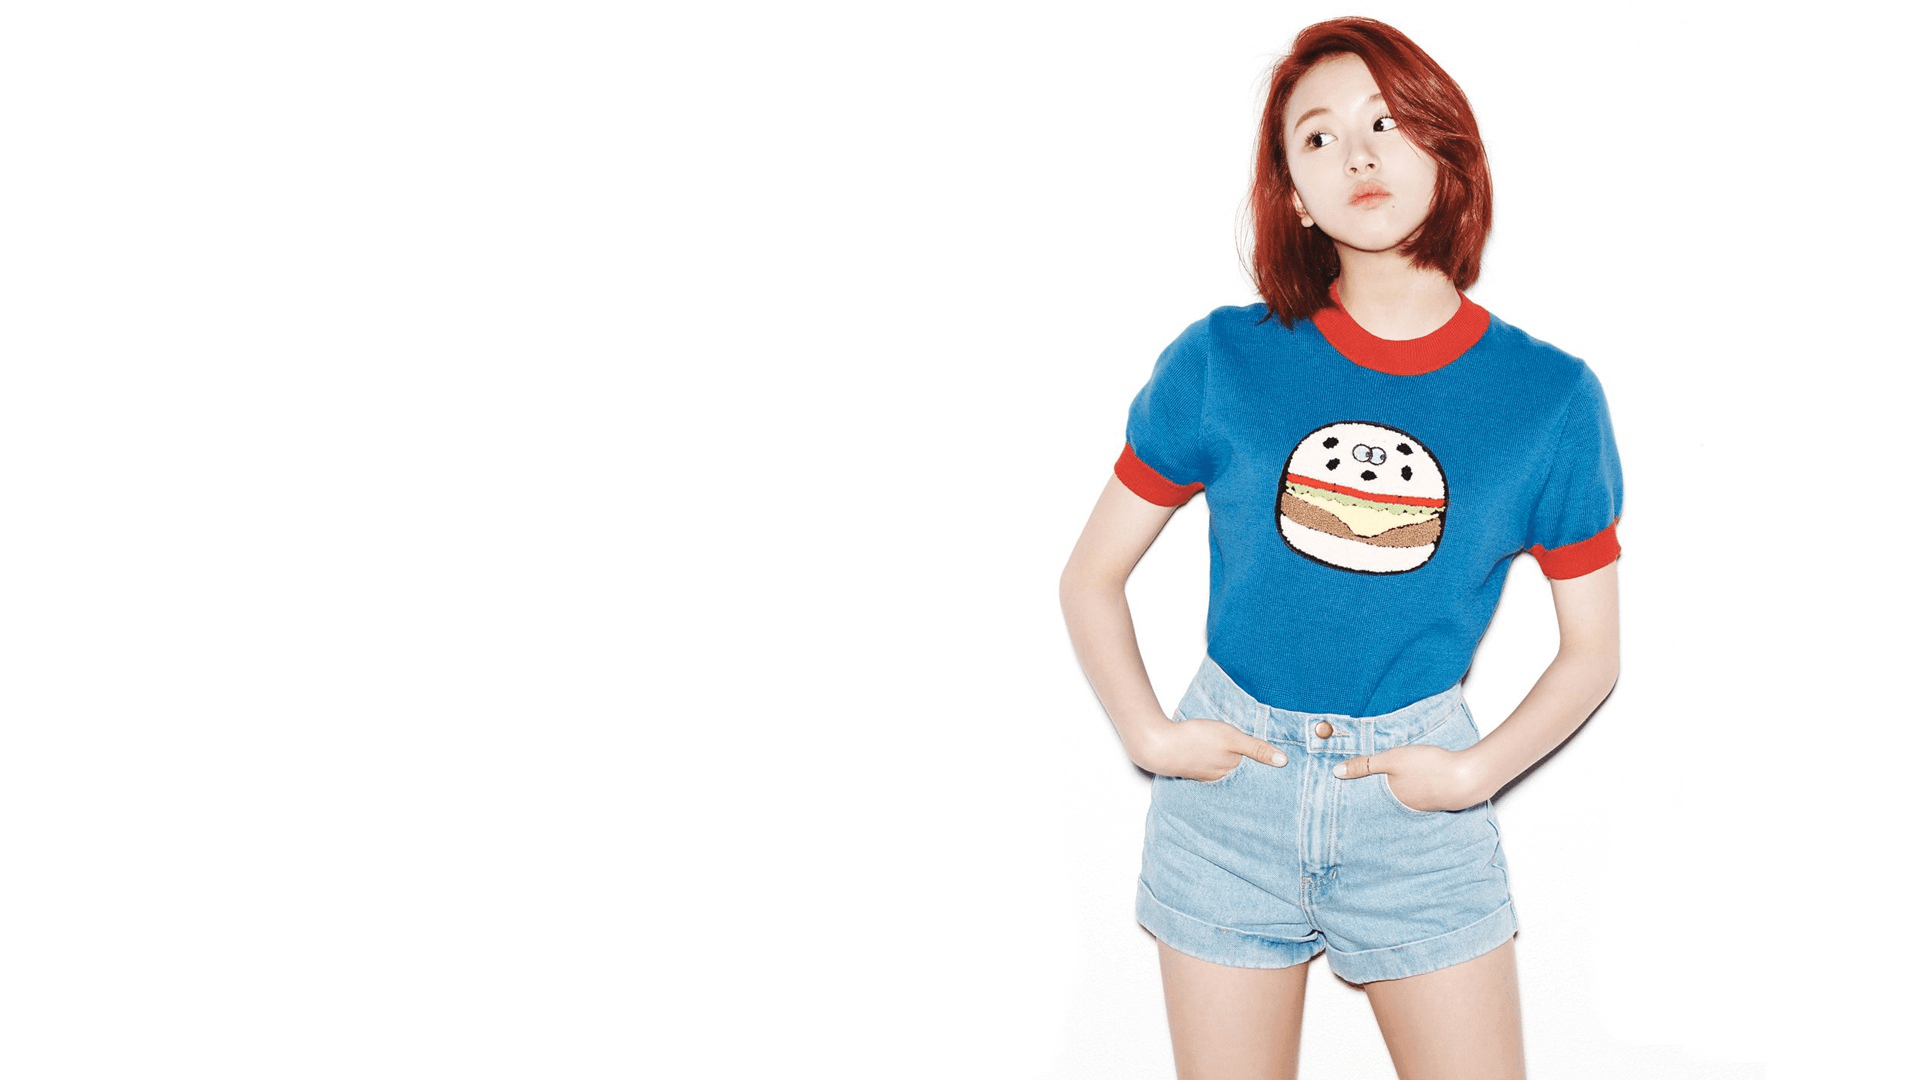 Chaeyoung Twice Wallpapers - Wallpaper Cave